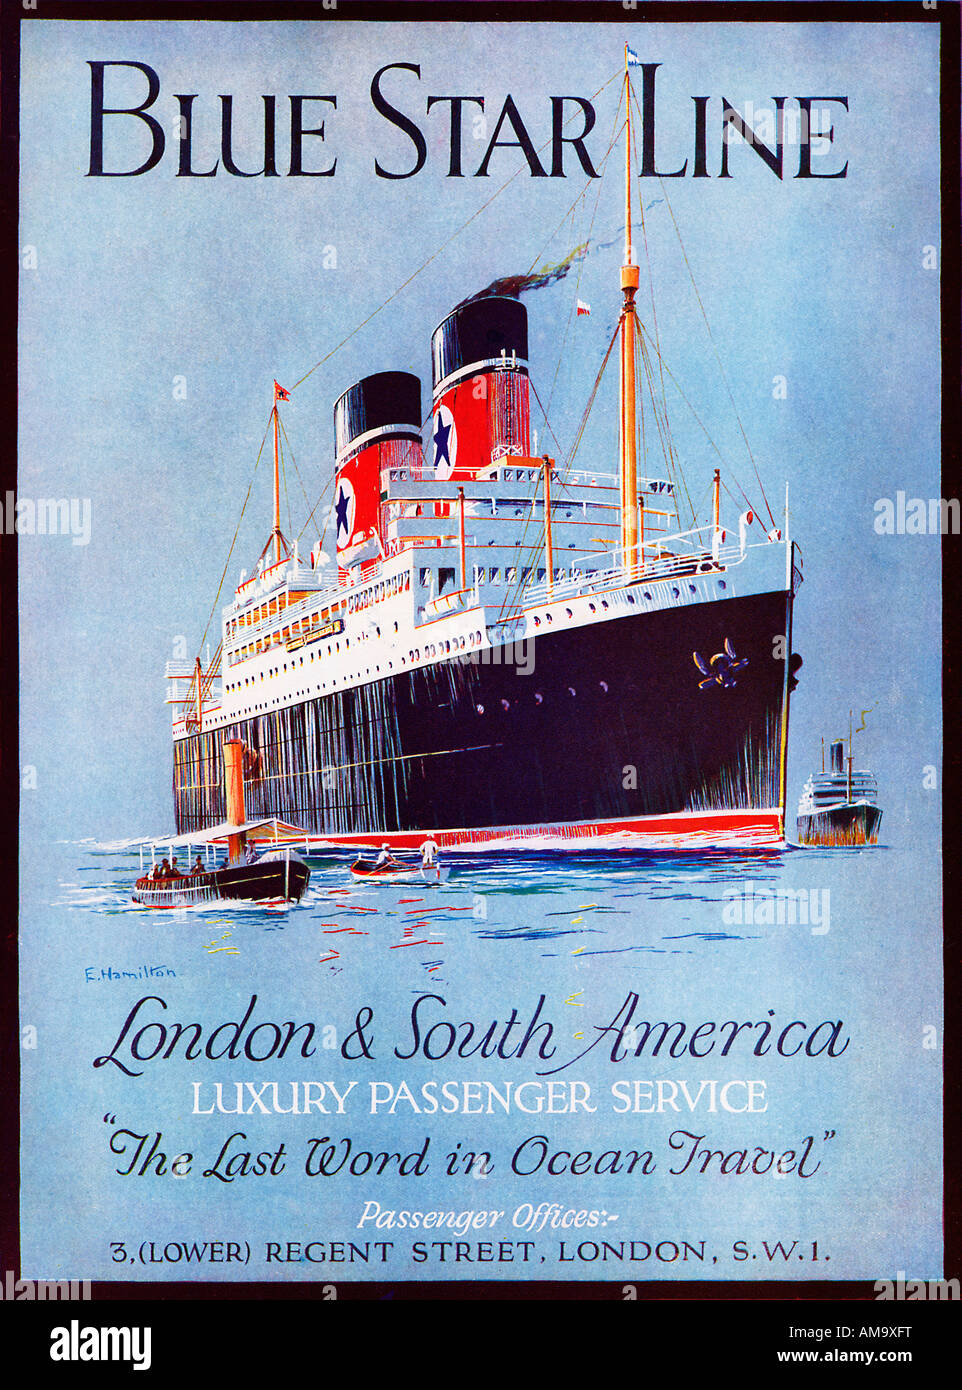 Blue Star Line 1930s advert for the luxury passenger service between London and South America Stock Photo